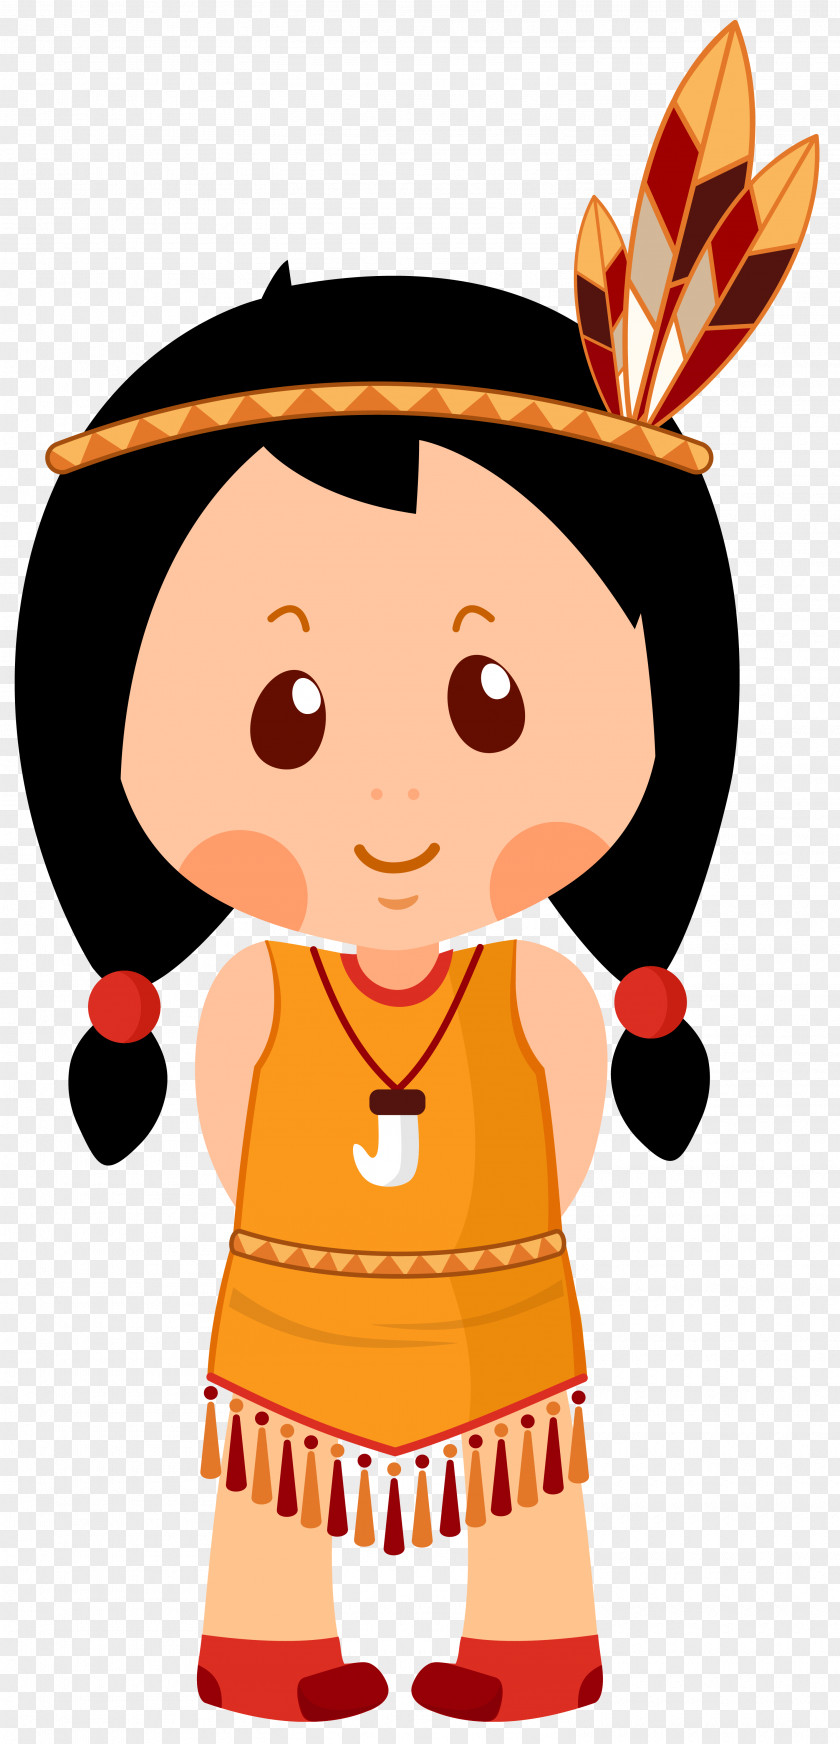 Native Americans In The United States Girl PNG in the , American Clipar native clipart PNG